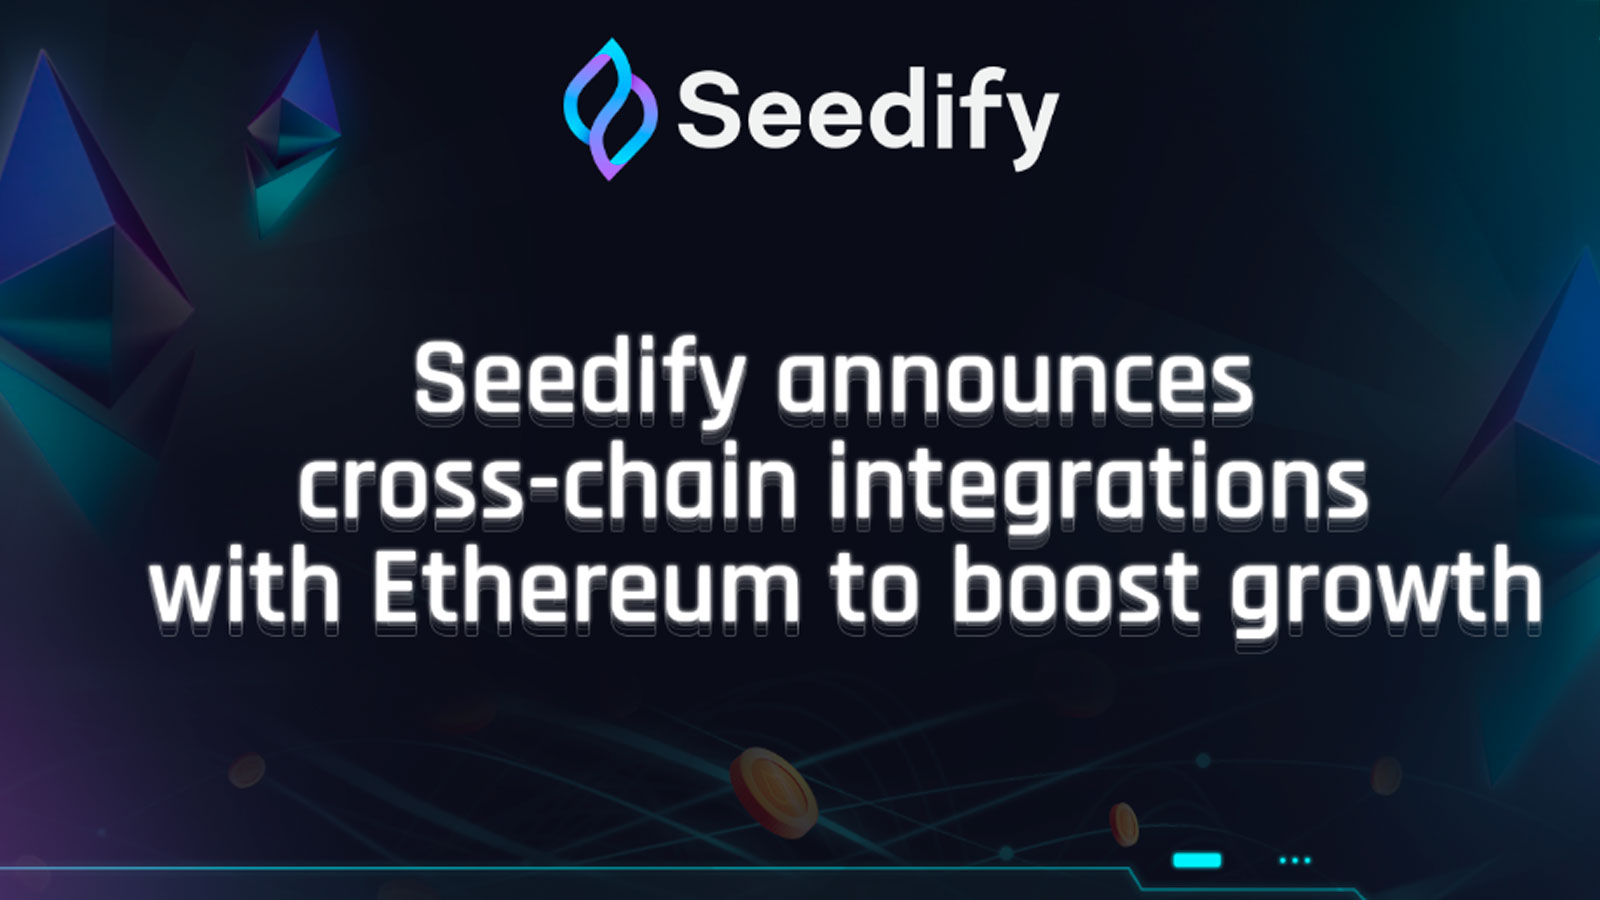 Seedify Announces Cross-Chain Integrations with the Ethereum Network to Boost Growth